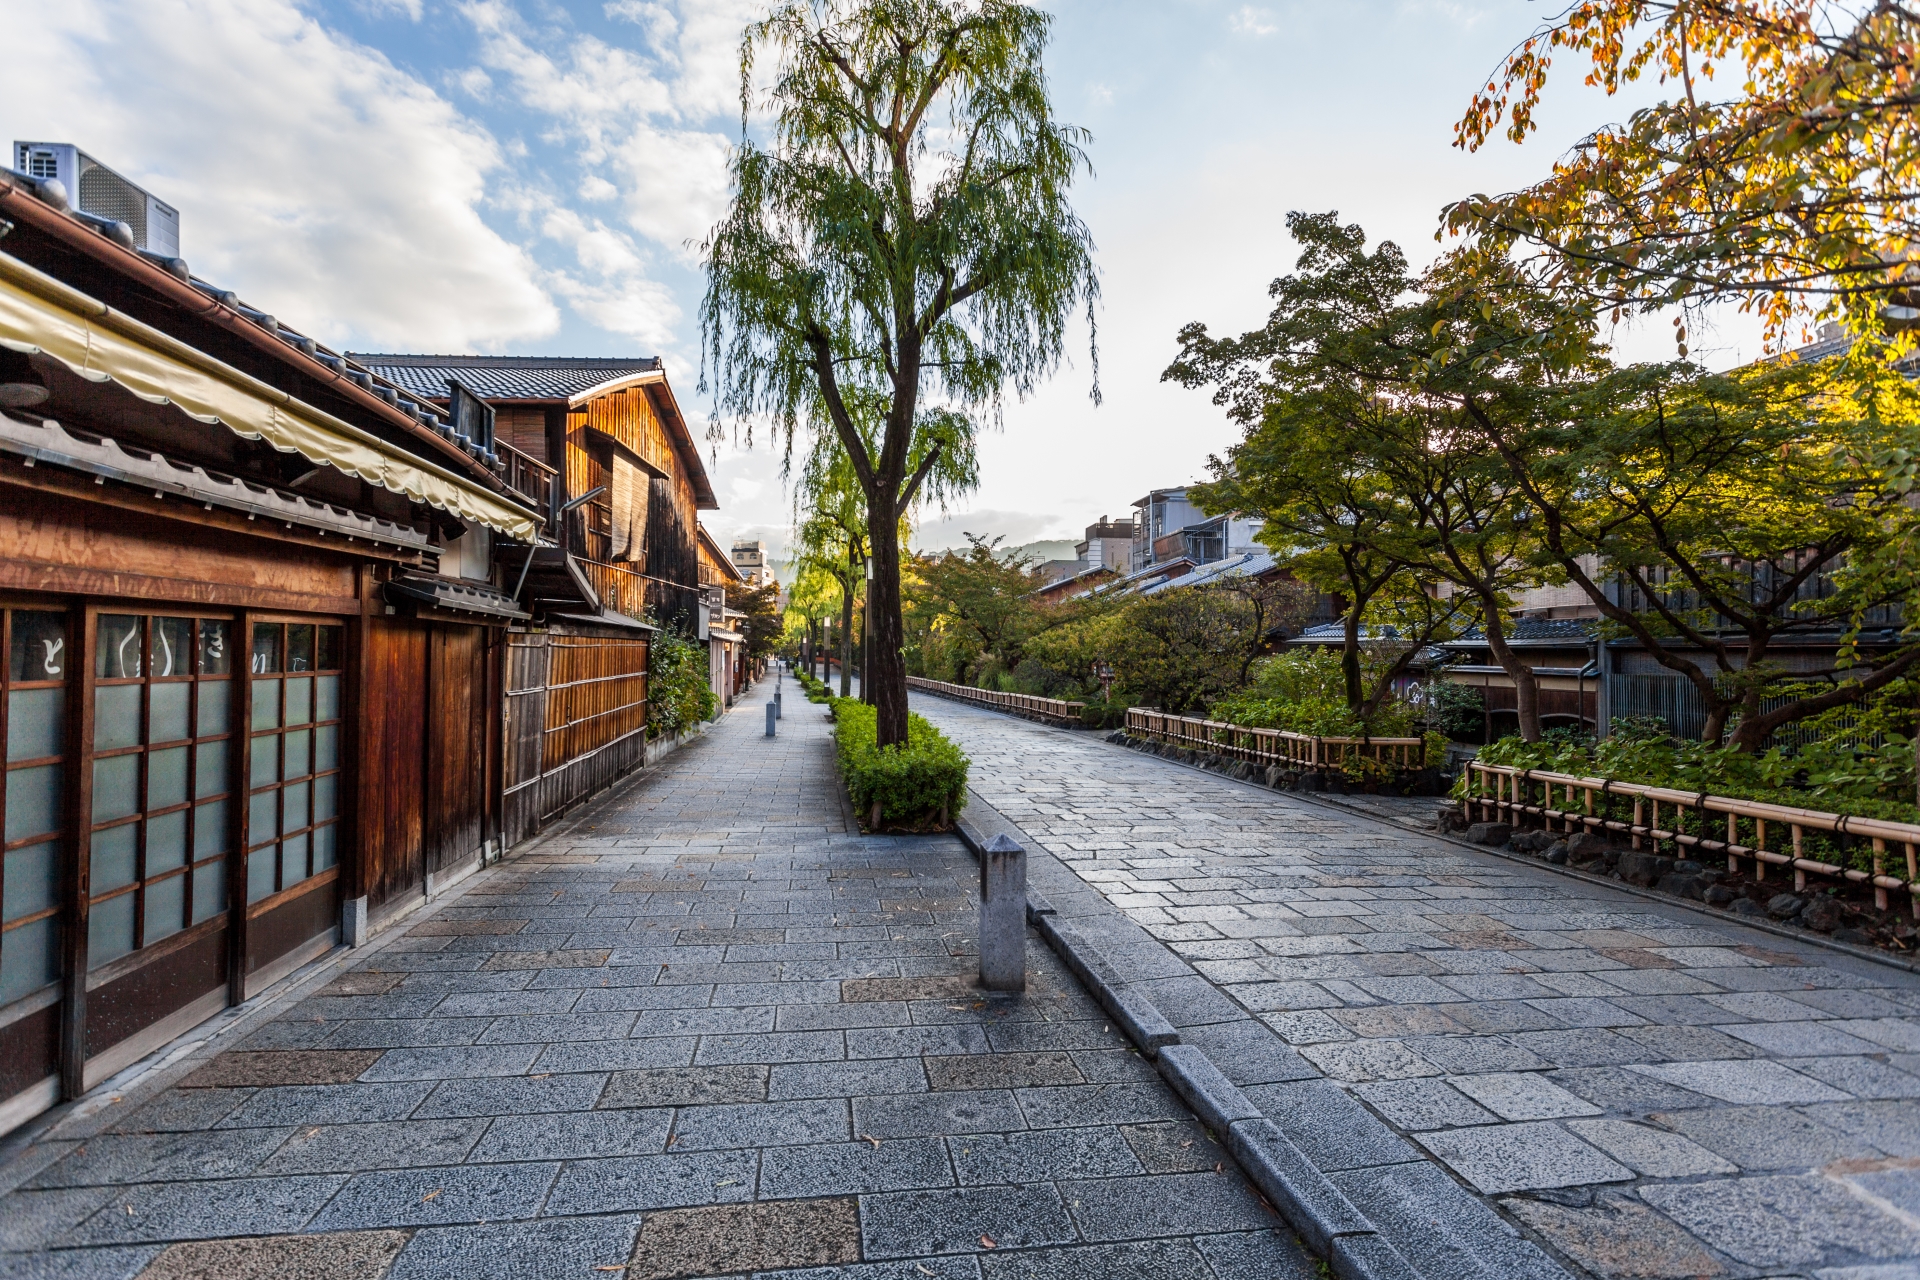 Gion District of Kyoto